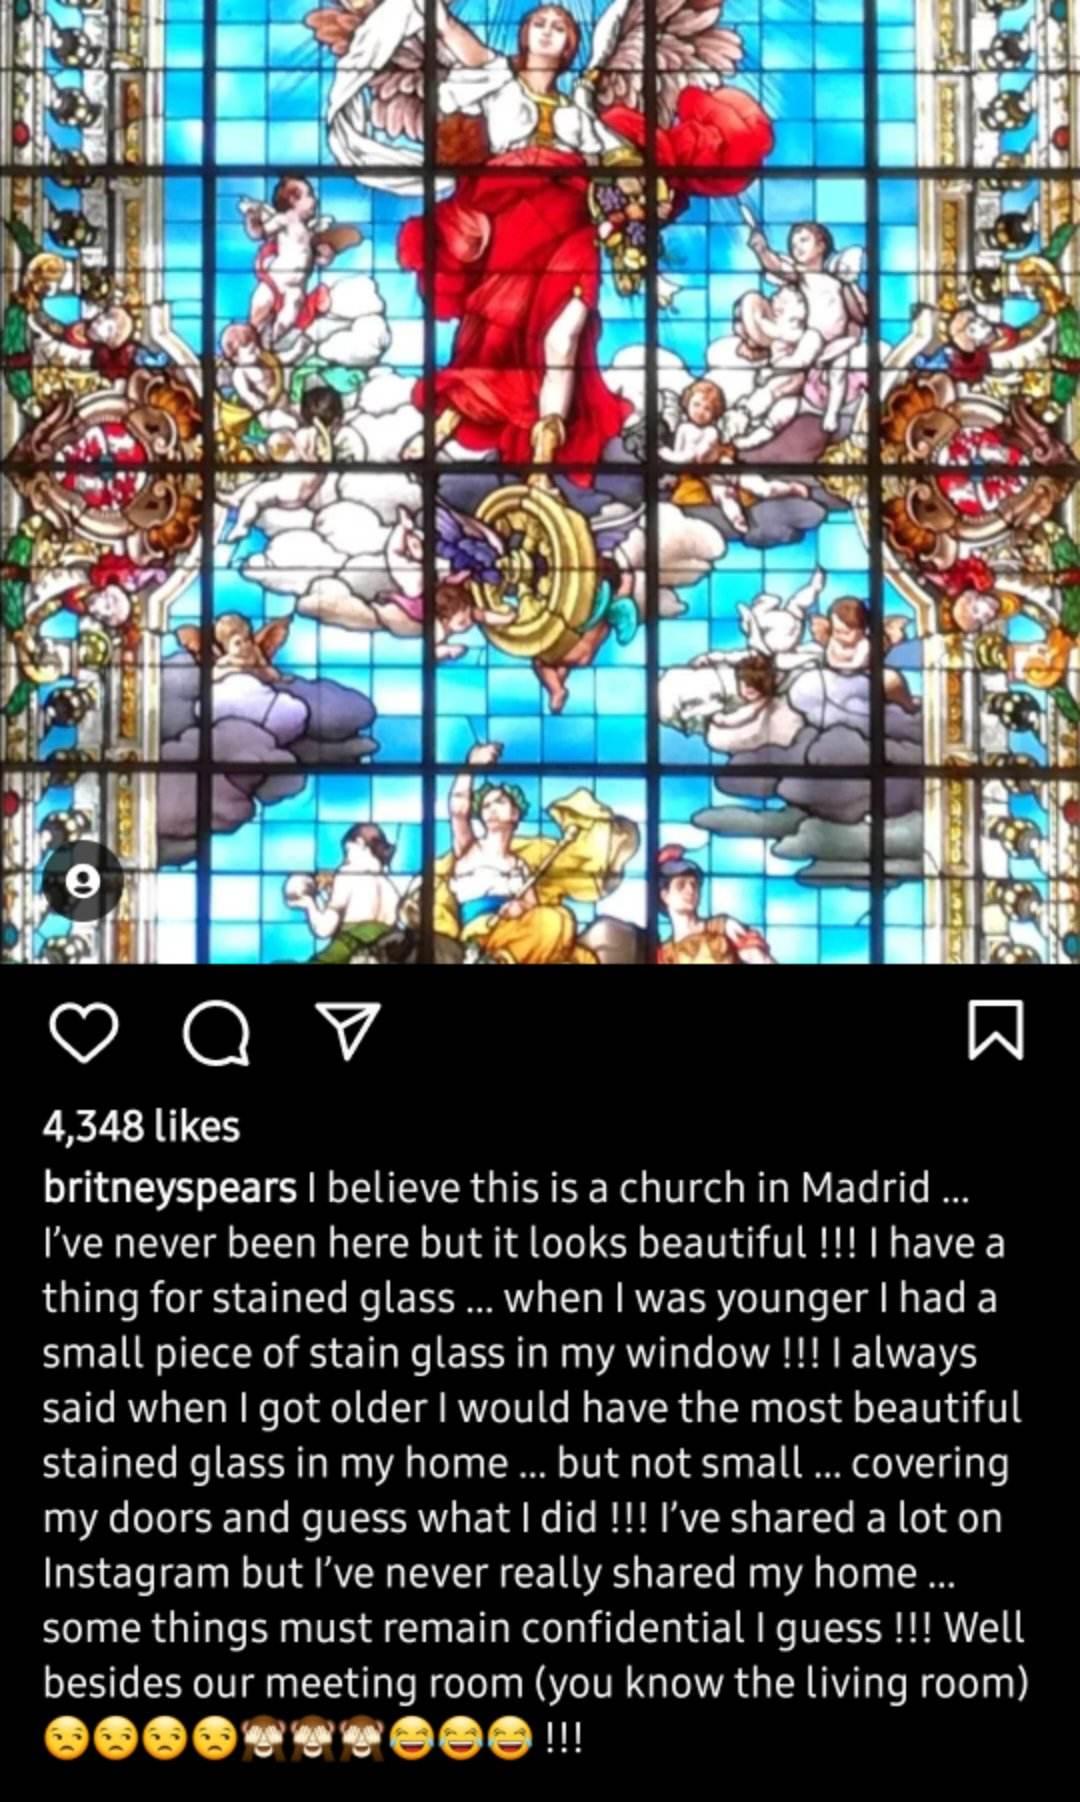 Britney Spears talks about a church